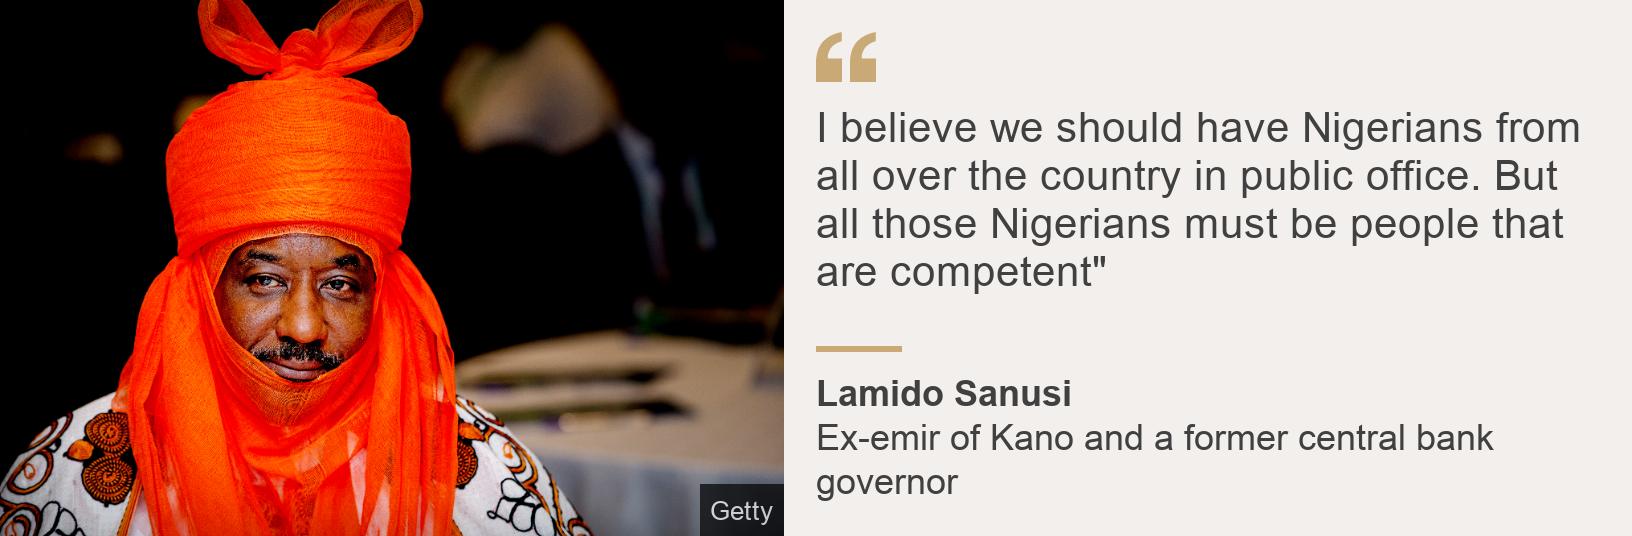 "I believe we should have Nigerians from all over the country in public office. But all those Nigerians must be people that are competent"", Source:  Lamido Sanusi, Source description: Ex-emir of Kano and a former central bank governor, Image: 